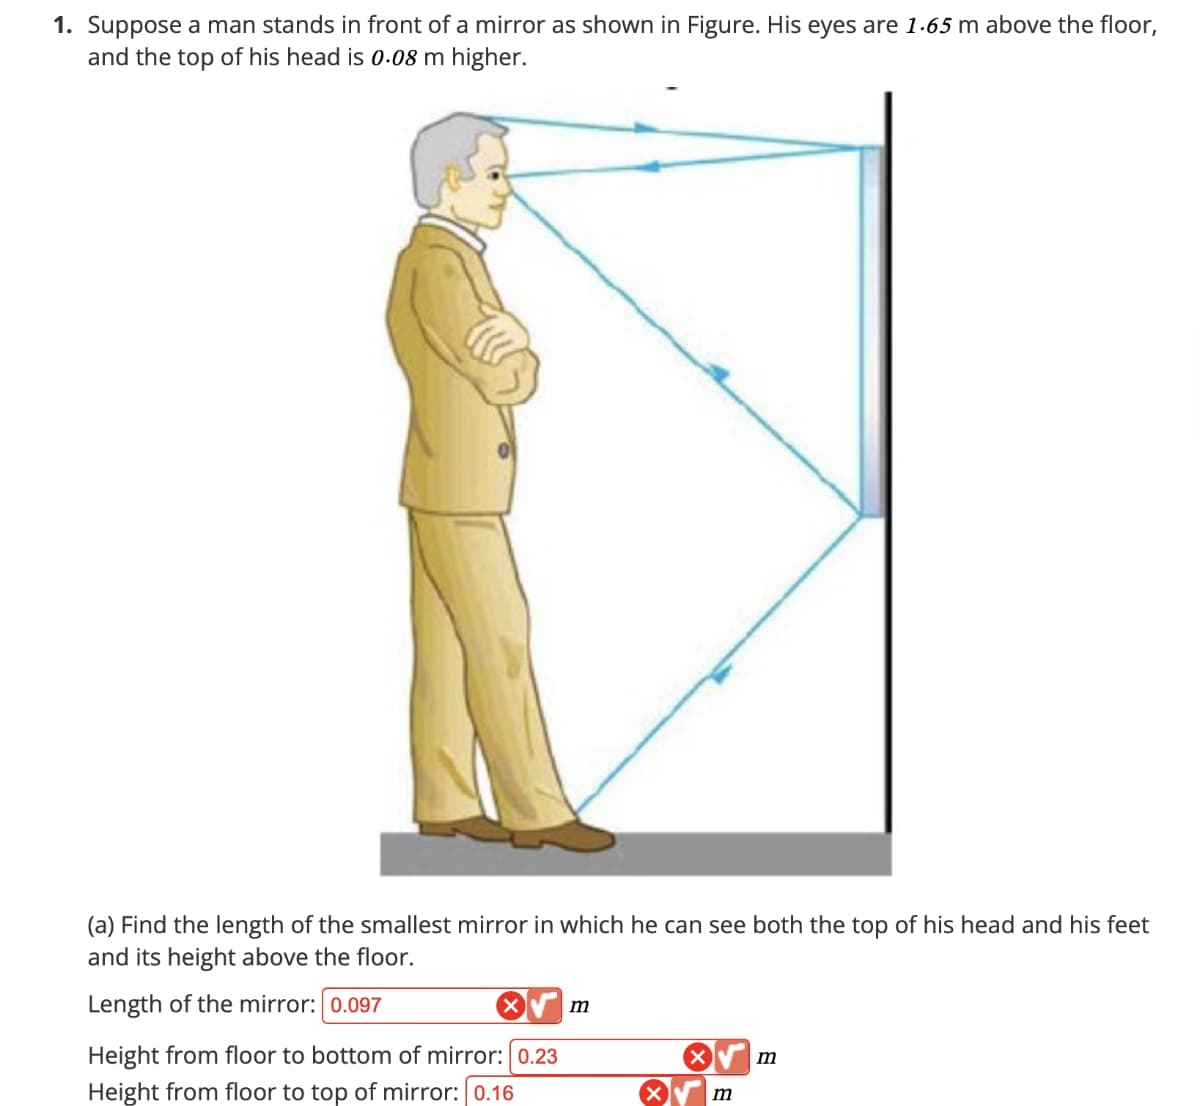 1. Suppose a man stands in front of a mirror as shown in Figure. His eyes are 1.65 m above the floor,
and the top of his head is 0.08 m higher.
(a) Find the length of the smallest mirror in which he can see both the top of his head and his feet
and its height above the floor.
Length of the mirror: 0.097
✓
m
Height from floor to bottom of mirror: 0.23
Height from floor to top of mirror: 0.16
m
m